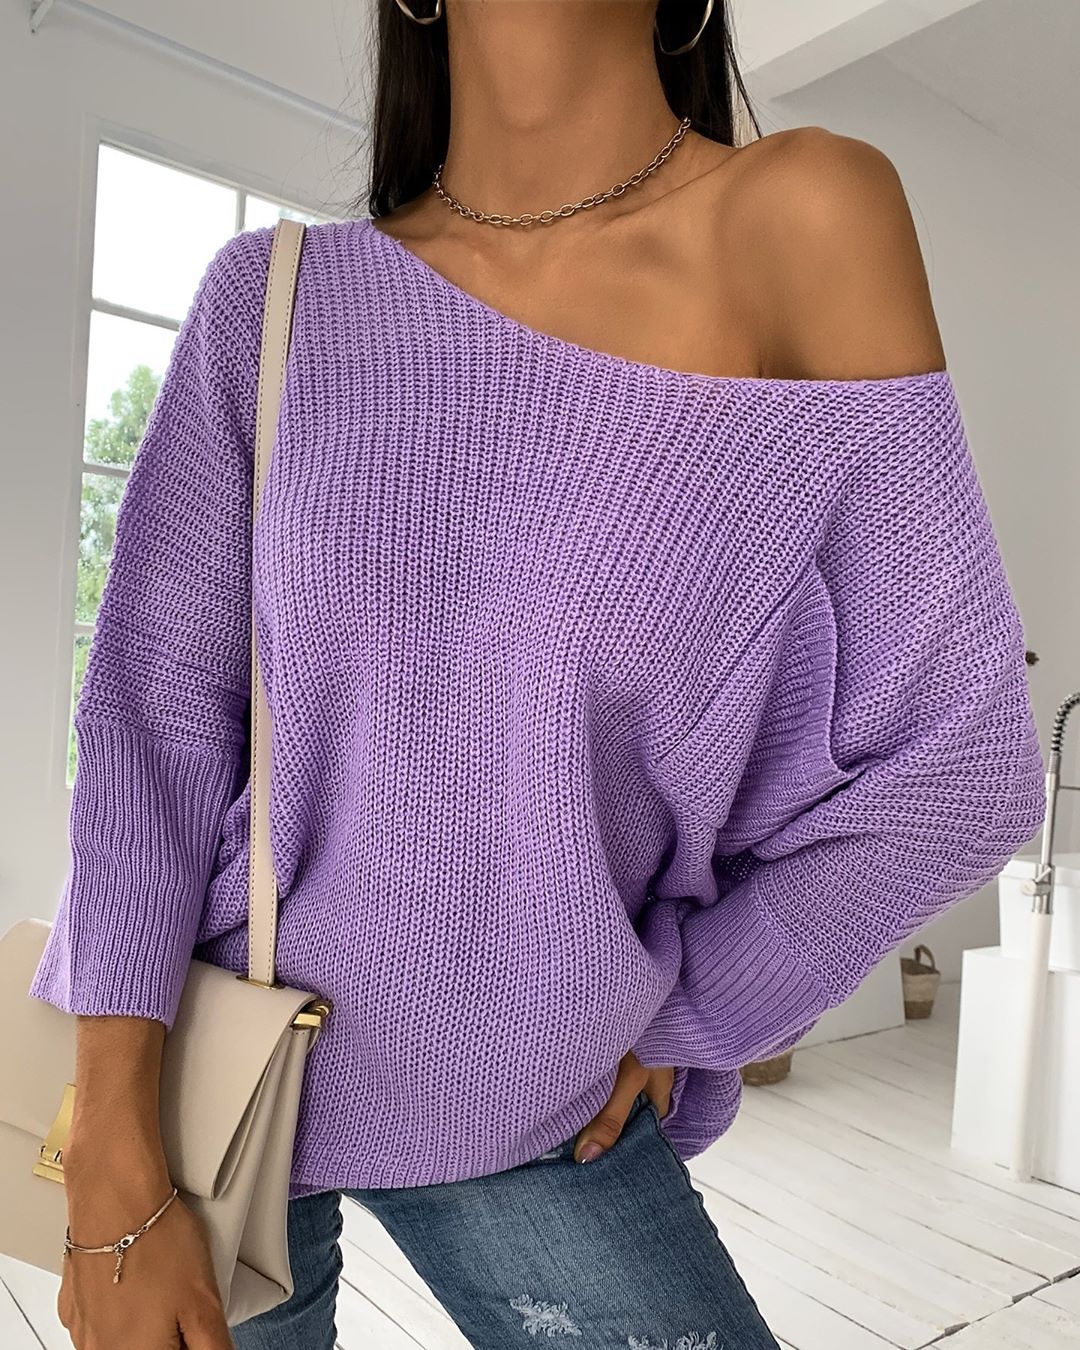 boutiquefeel_official - September looks we can’t get enough of.⁠
Go to link in bio to shop!⁠
🔍SKU：X6123⁠
Shop:boutiquefeel.com⁠
⁠
 #fashion #style #sweaterweather